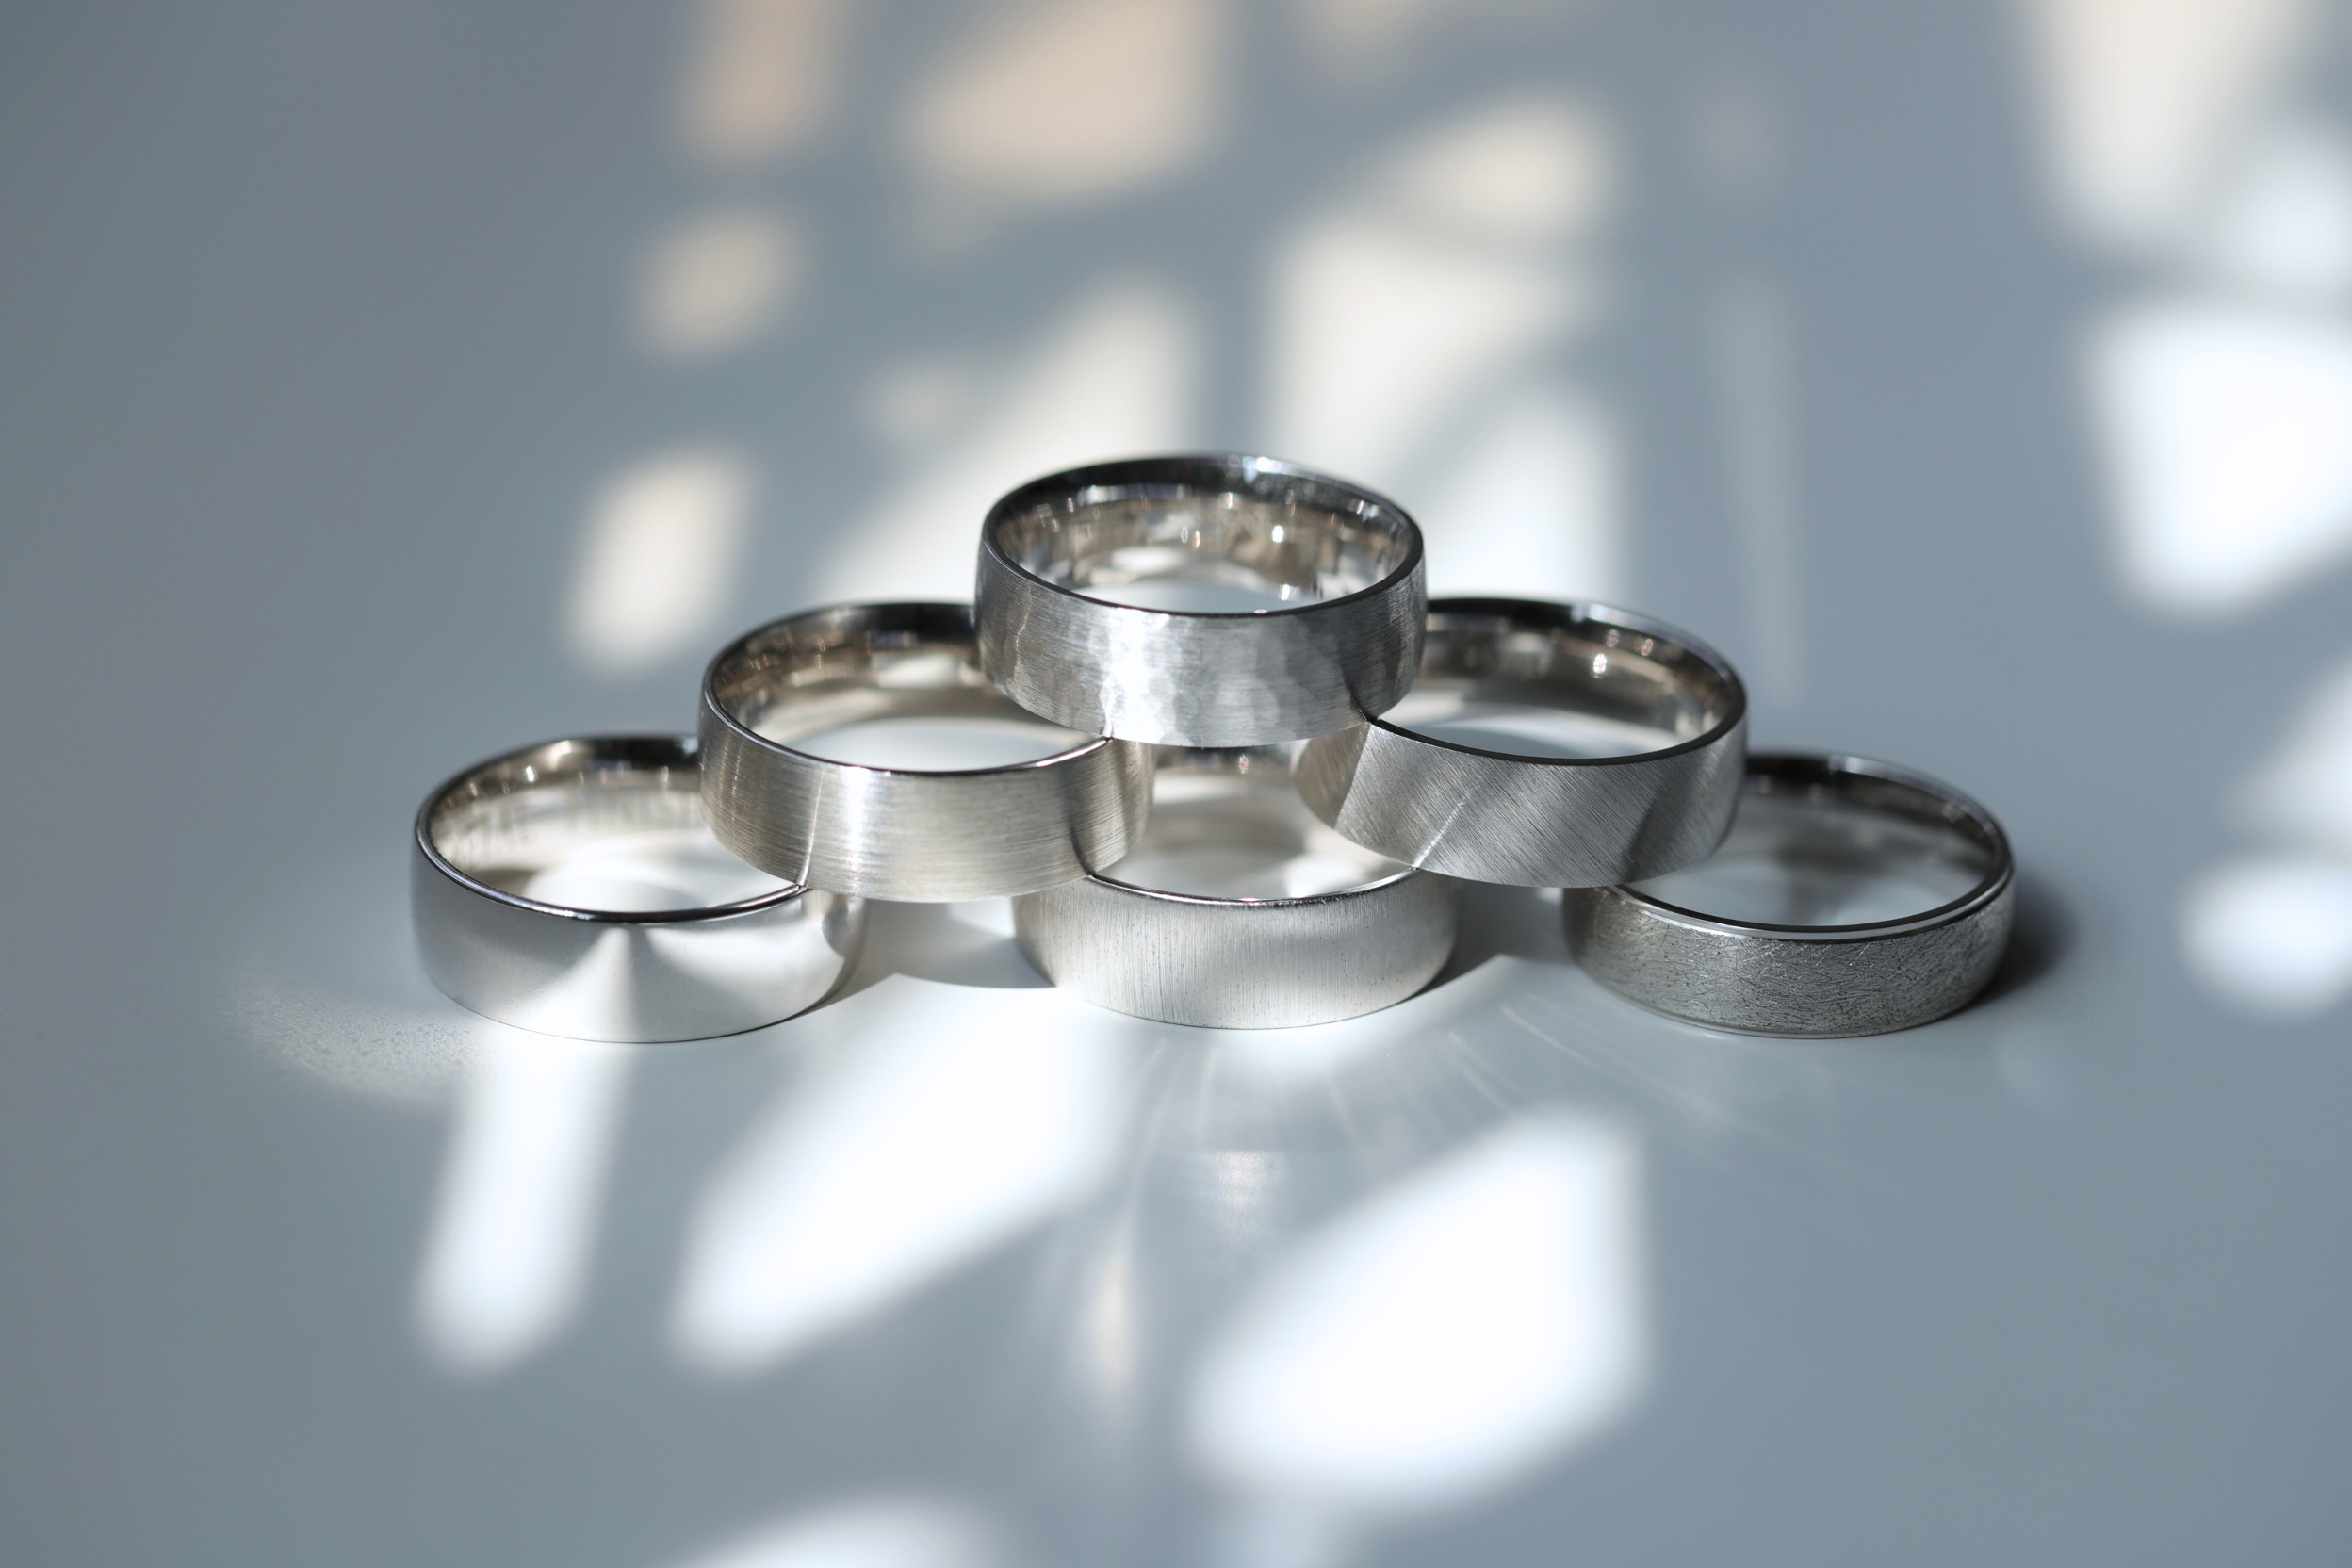 The Variety of Different Men's Wedding Ring Finishes